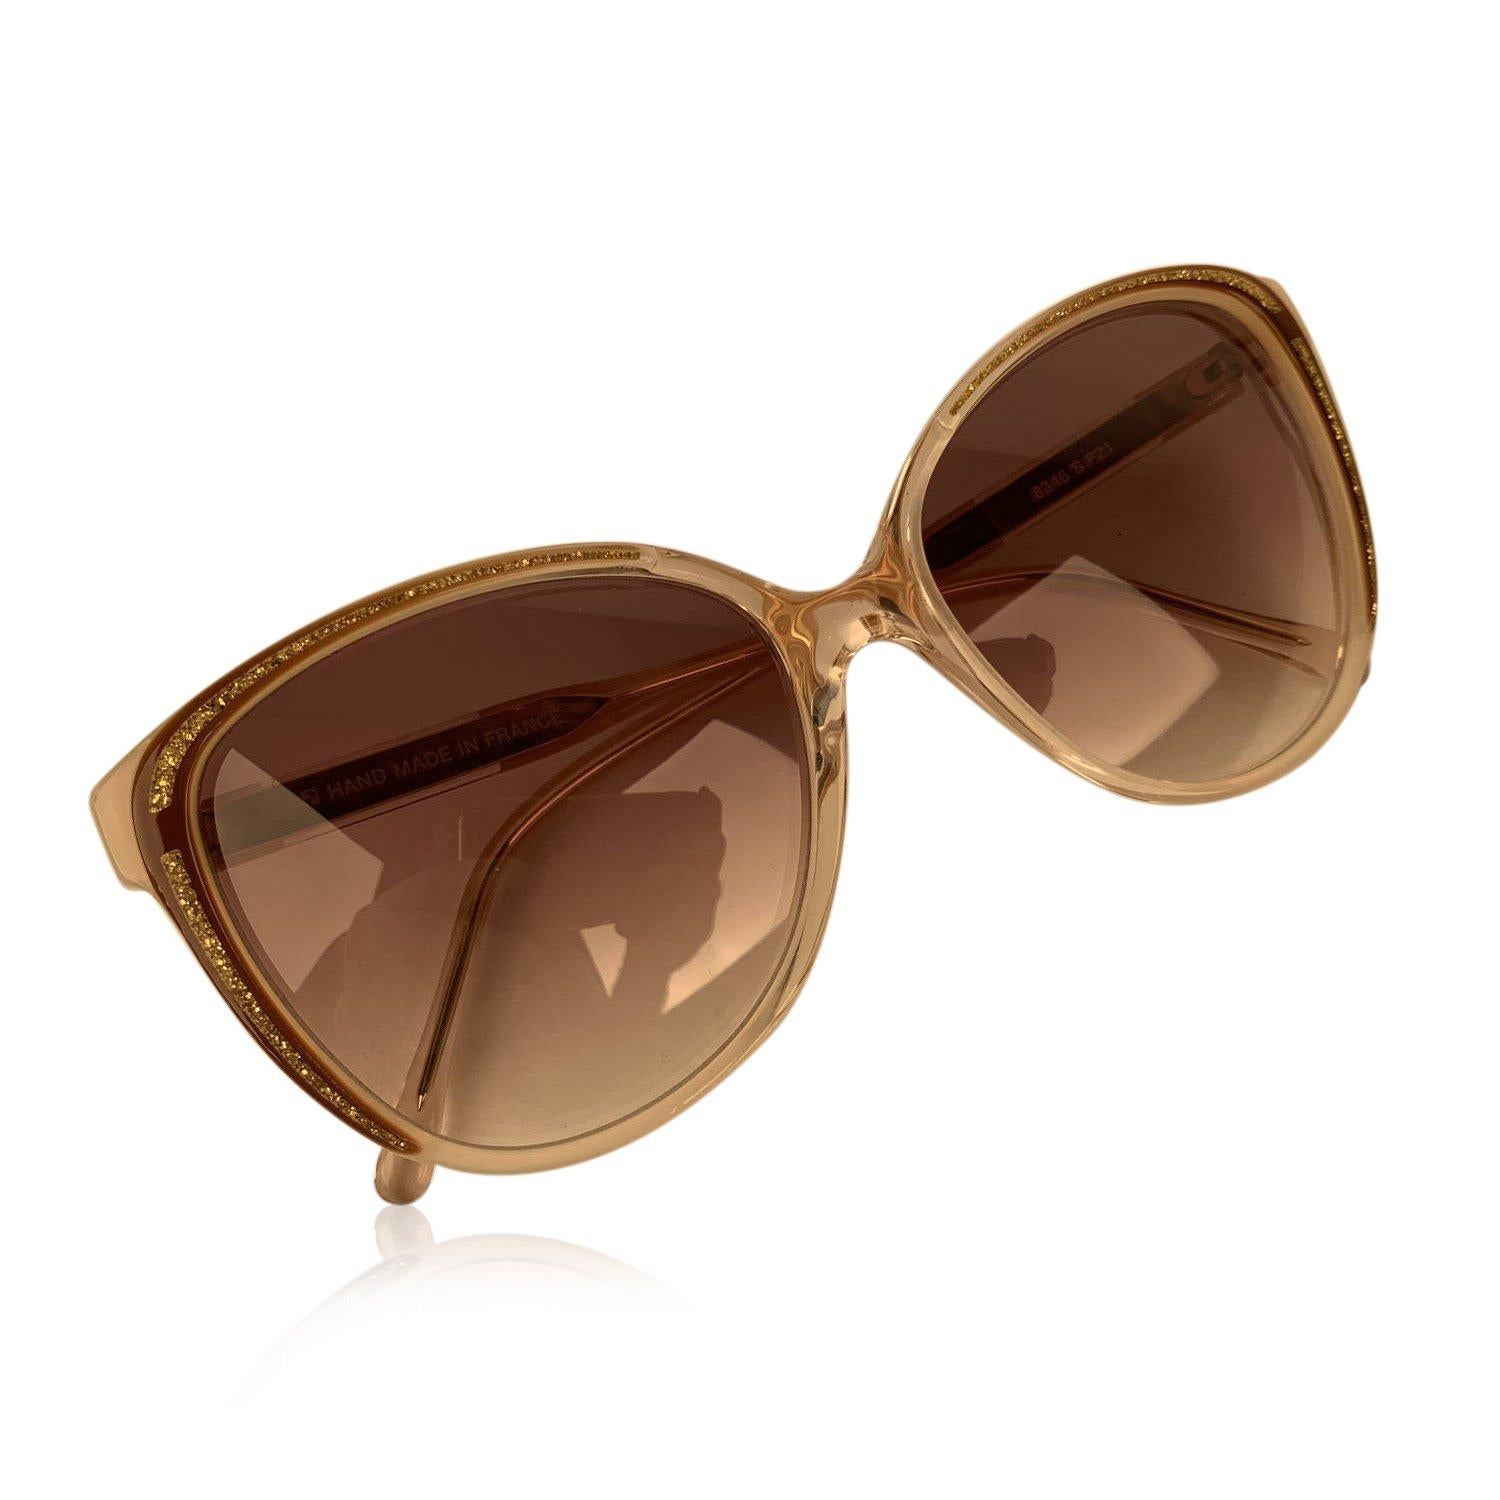 Vintage YVES SAINT LAURENT butterfly sunglasses, mod. 8346. Ivory acetate frame with Gold glitter detailing on corners. YSL signatures on the side of the arms. model: 8346 S - P21. 100% UV excellent quality gradient brown lens. Made in France

Any